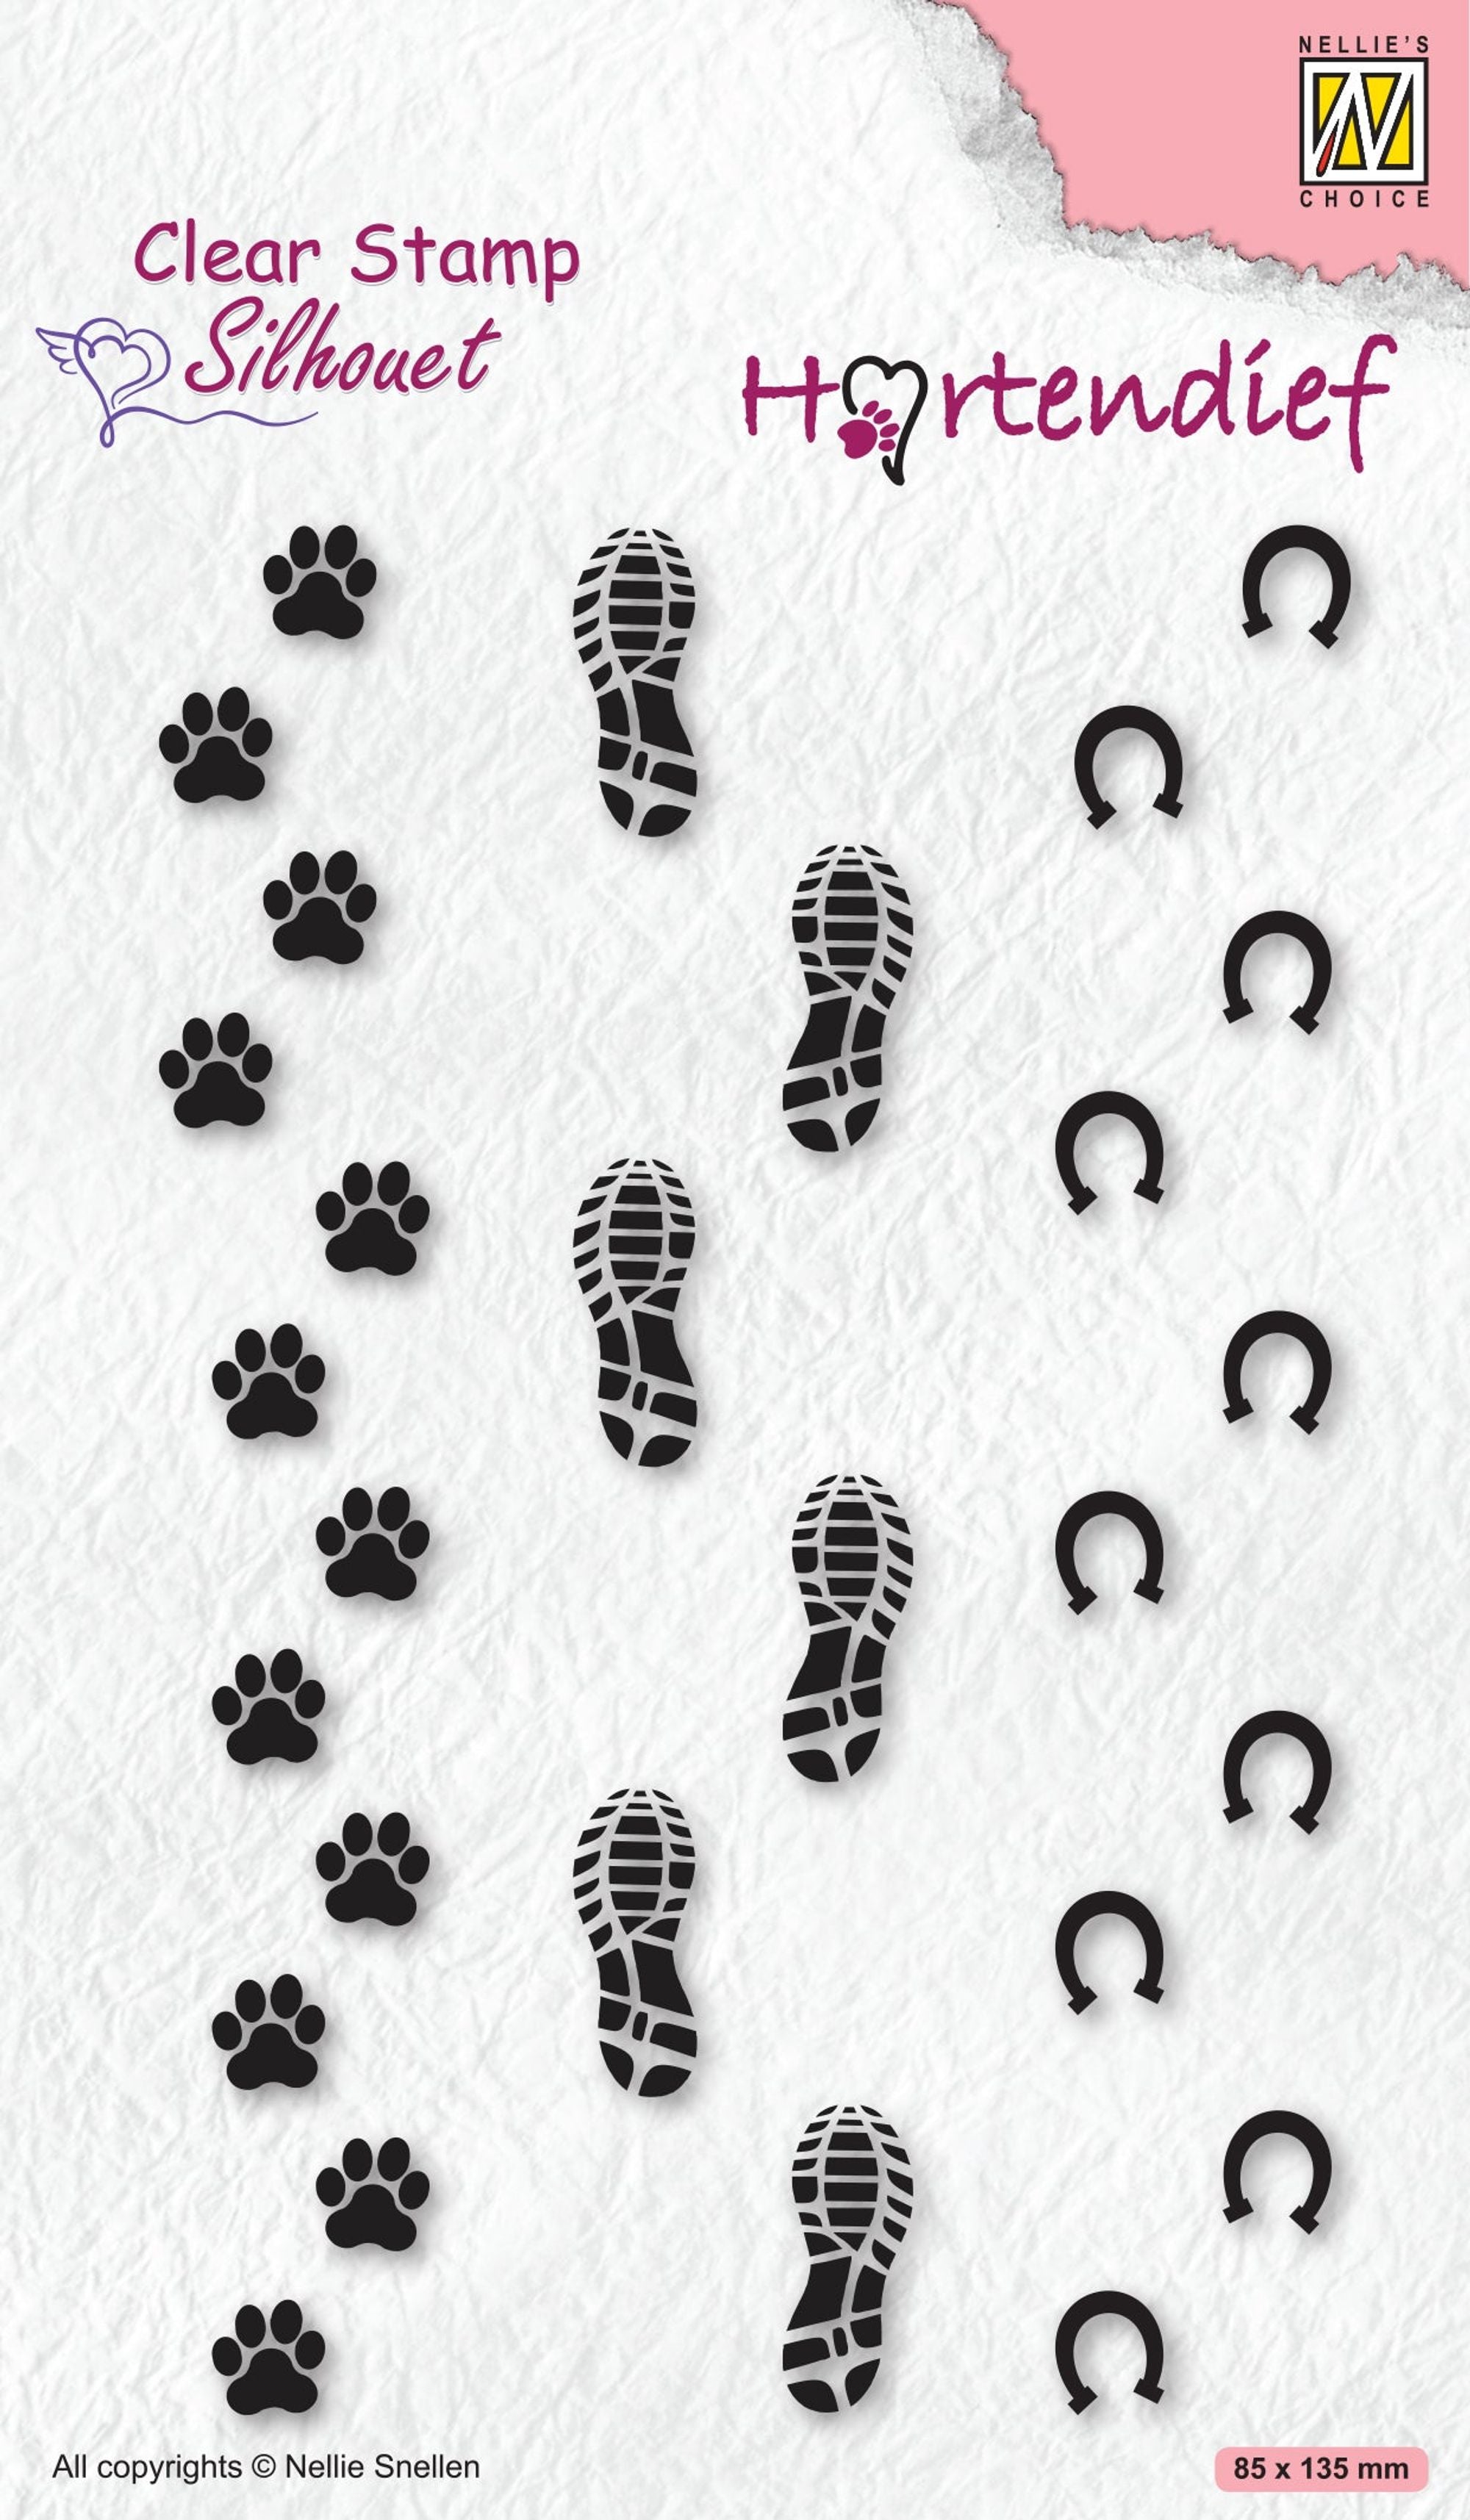 Nellie's Choice Clear Stamp Silhouette Footprints